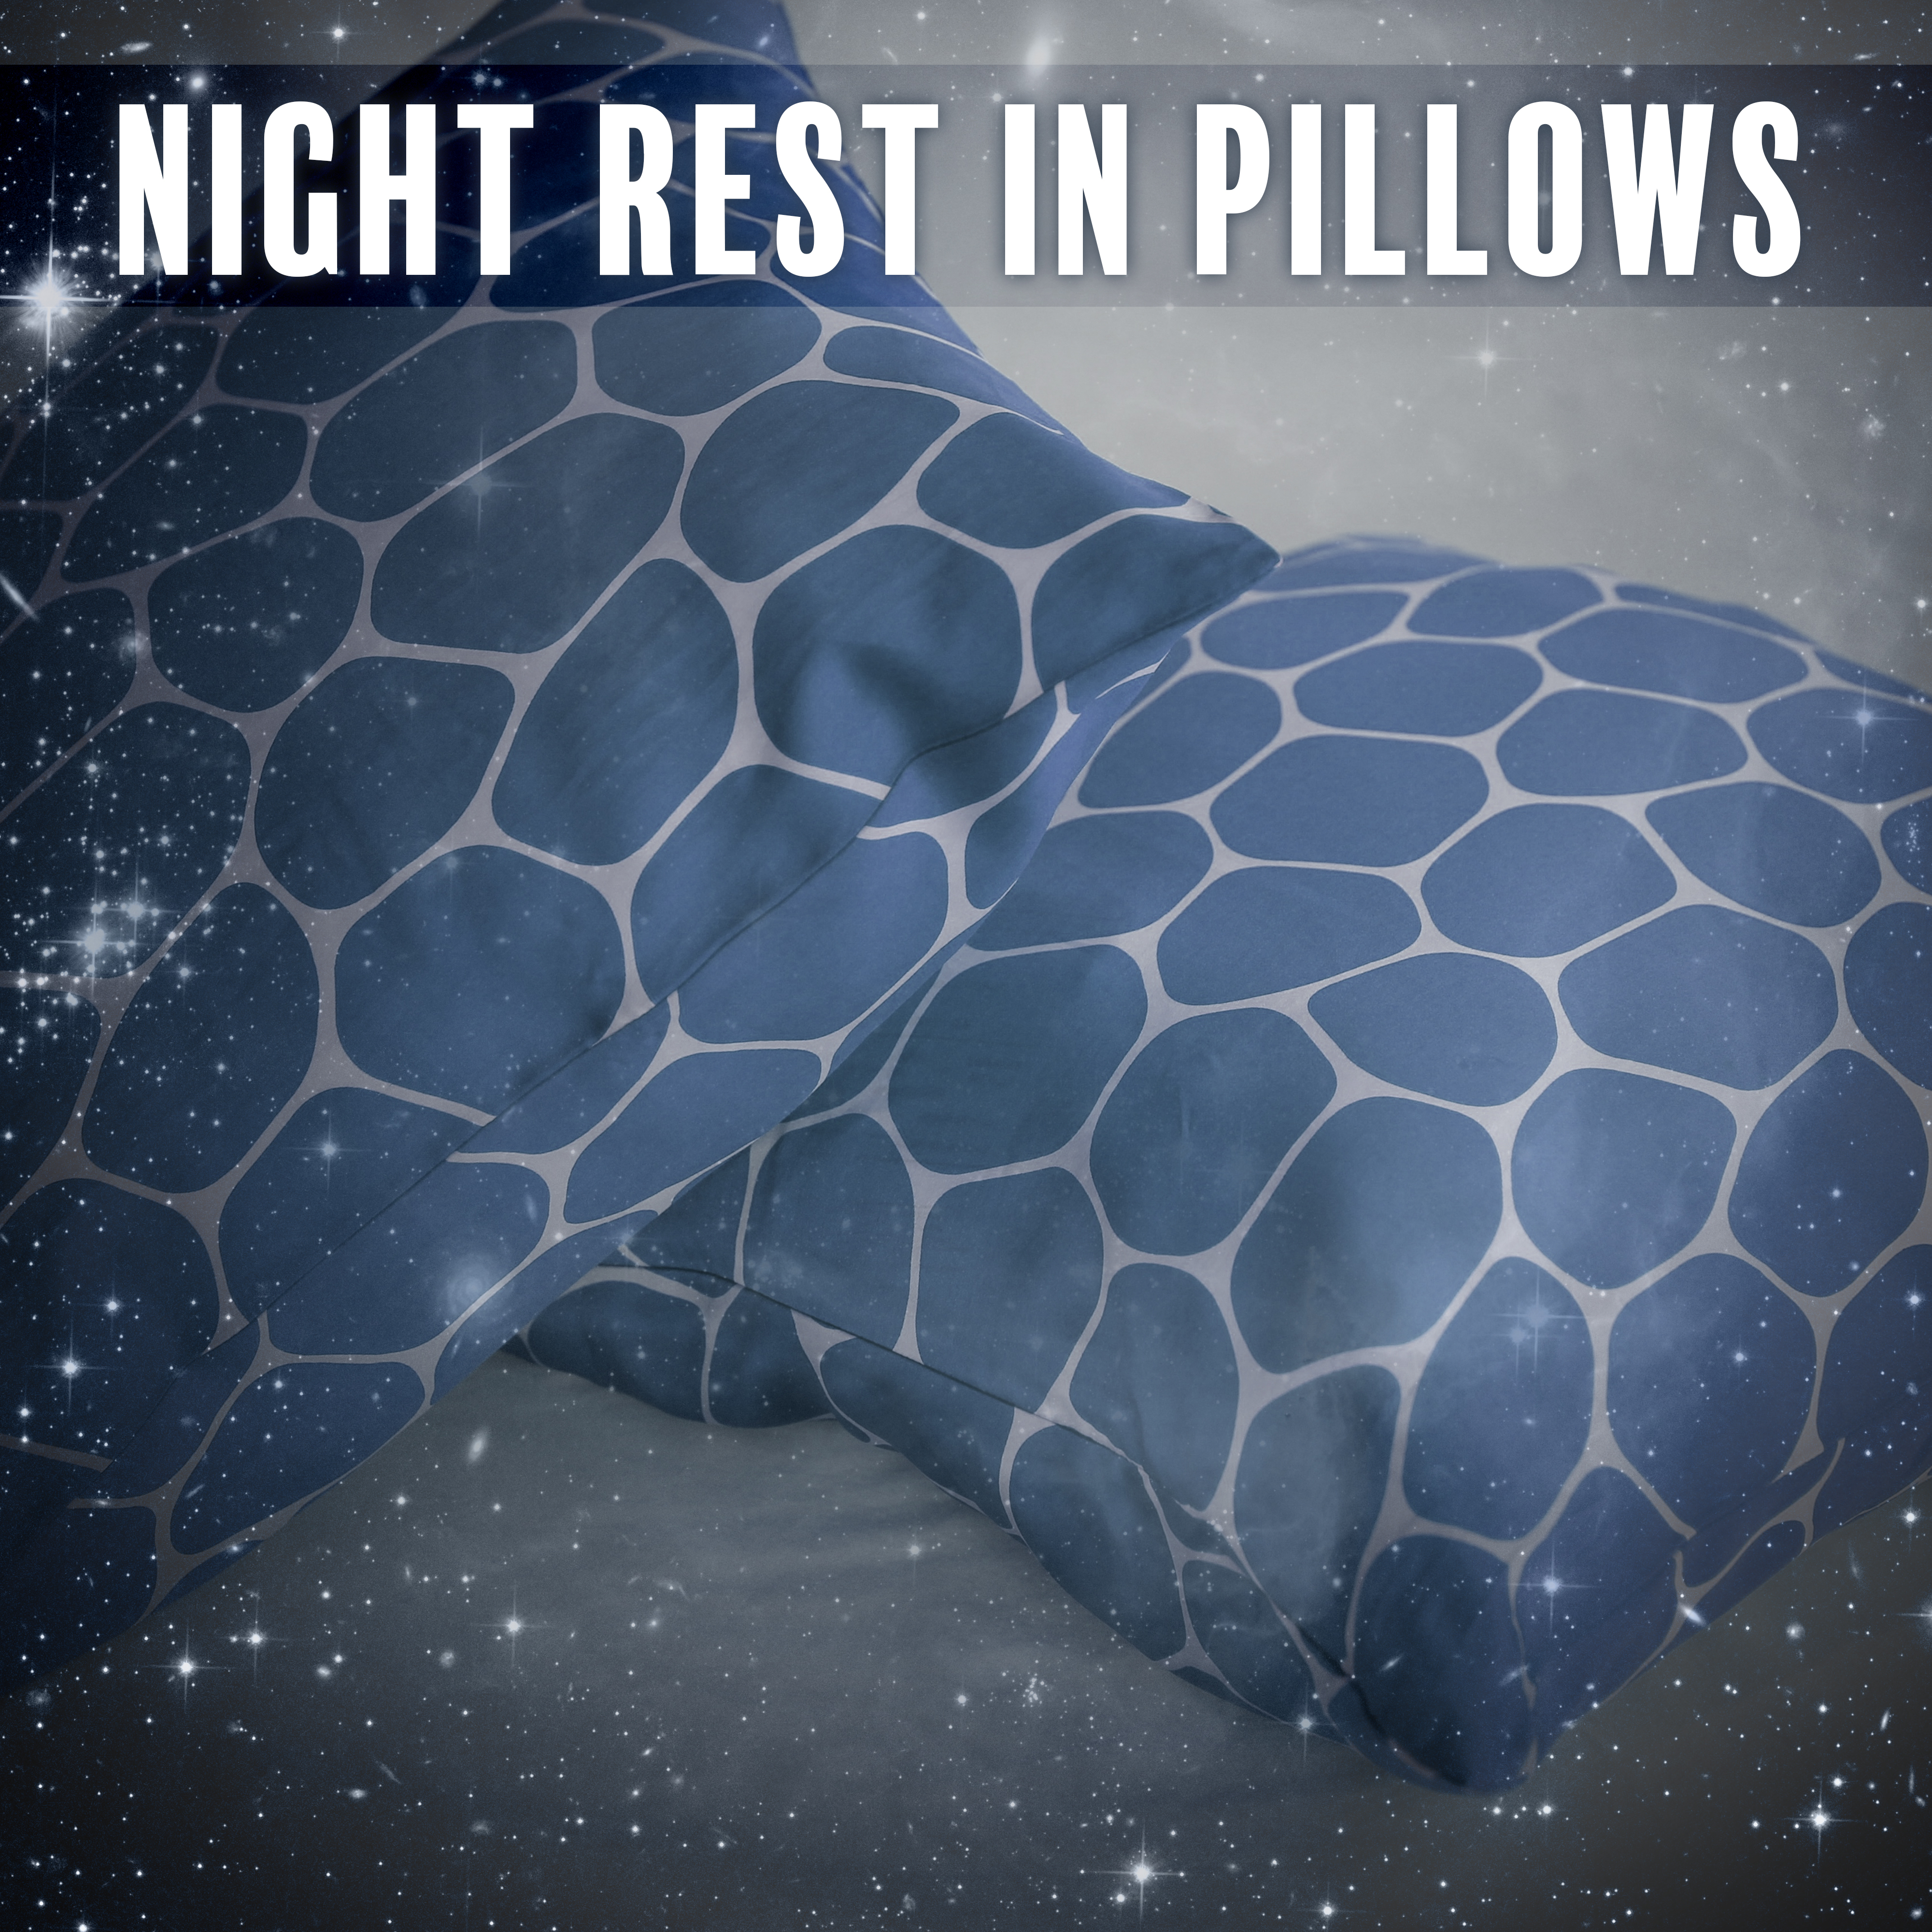 Night Rest in Pillows - Moment of Dreams, Time for Bed, Warm Blanket, Milk before Bedtime, Moon and Stars in the Sky